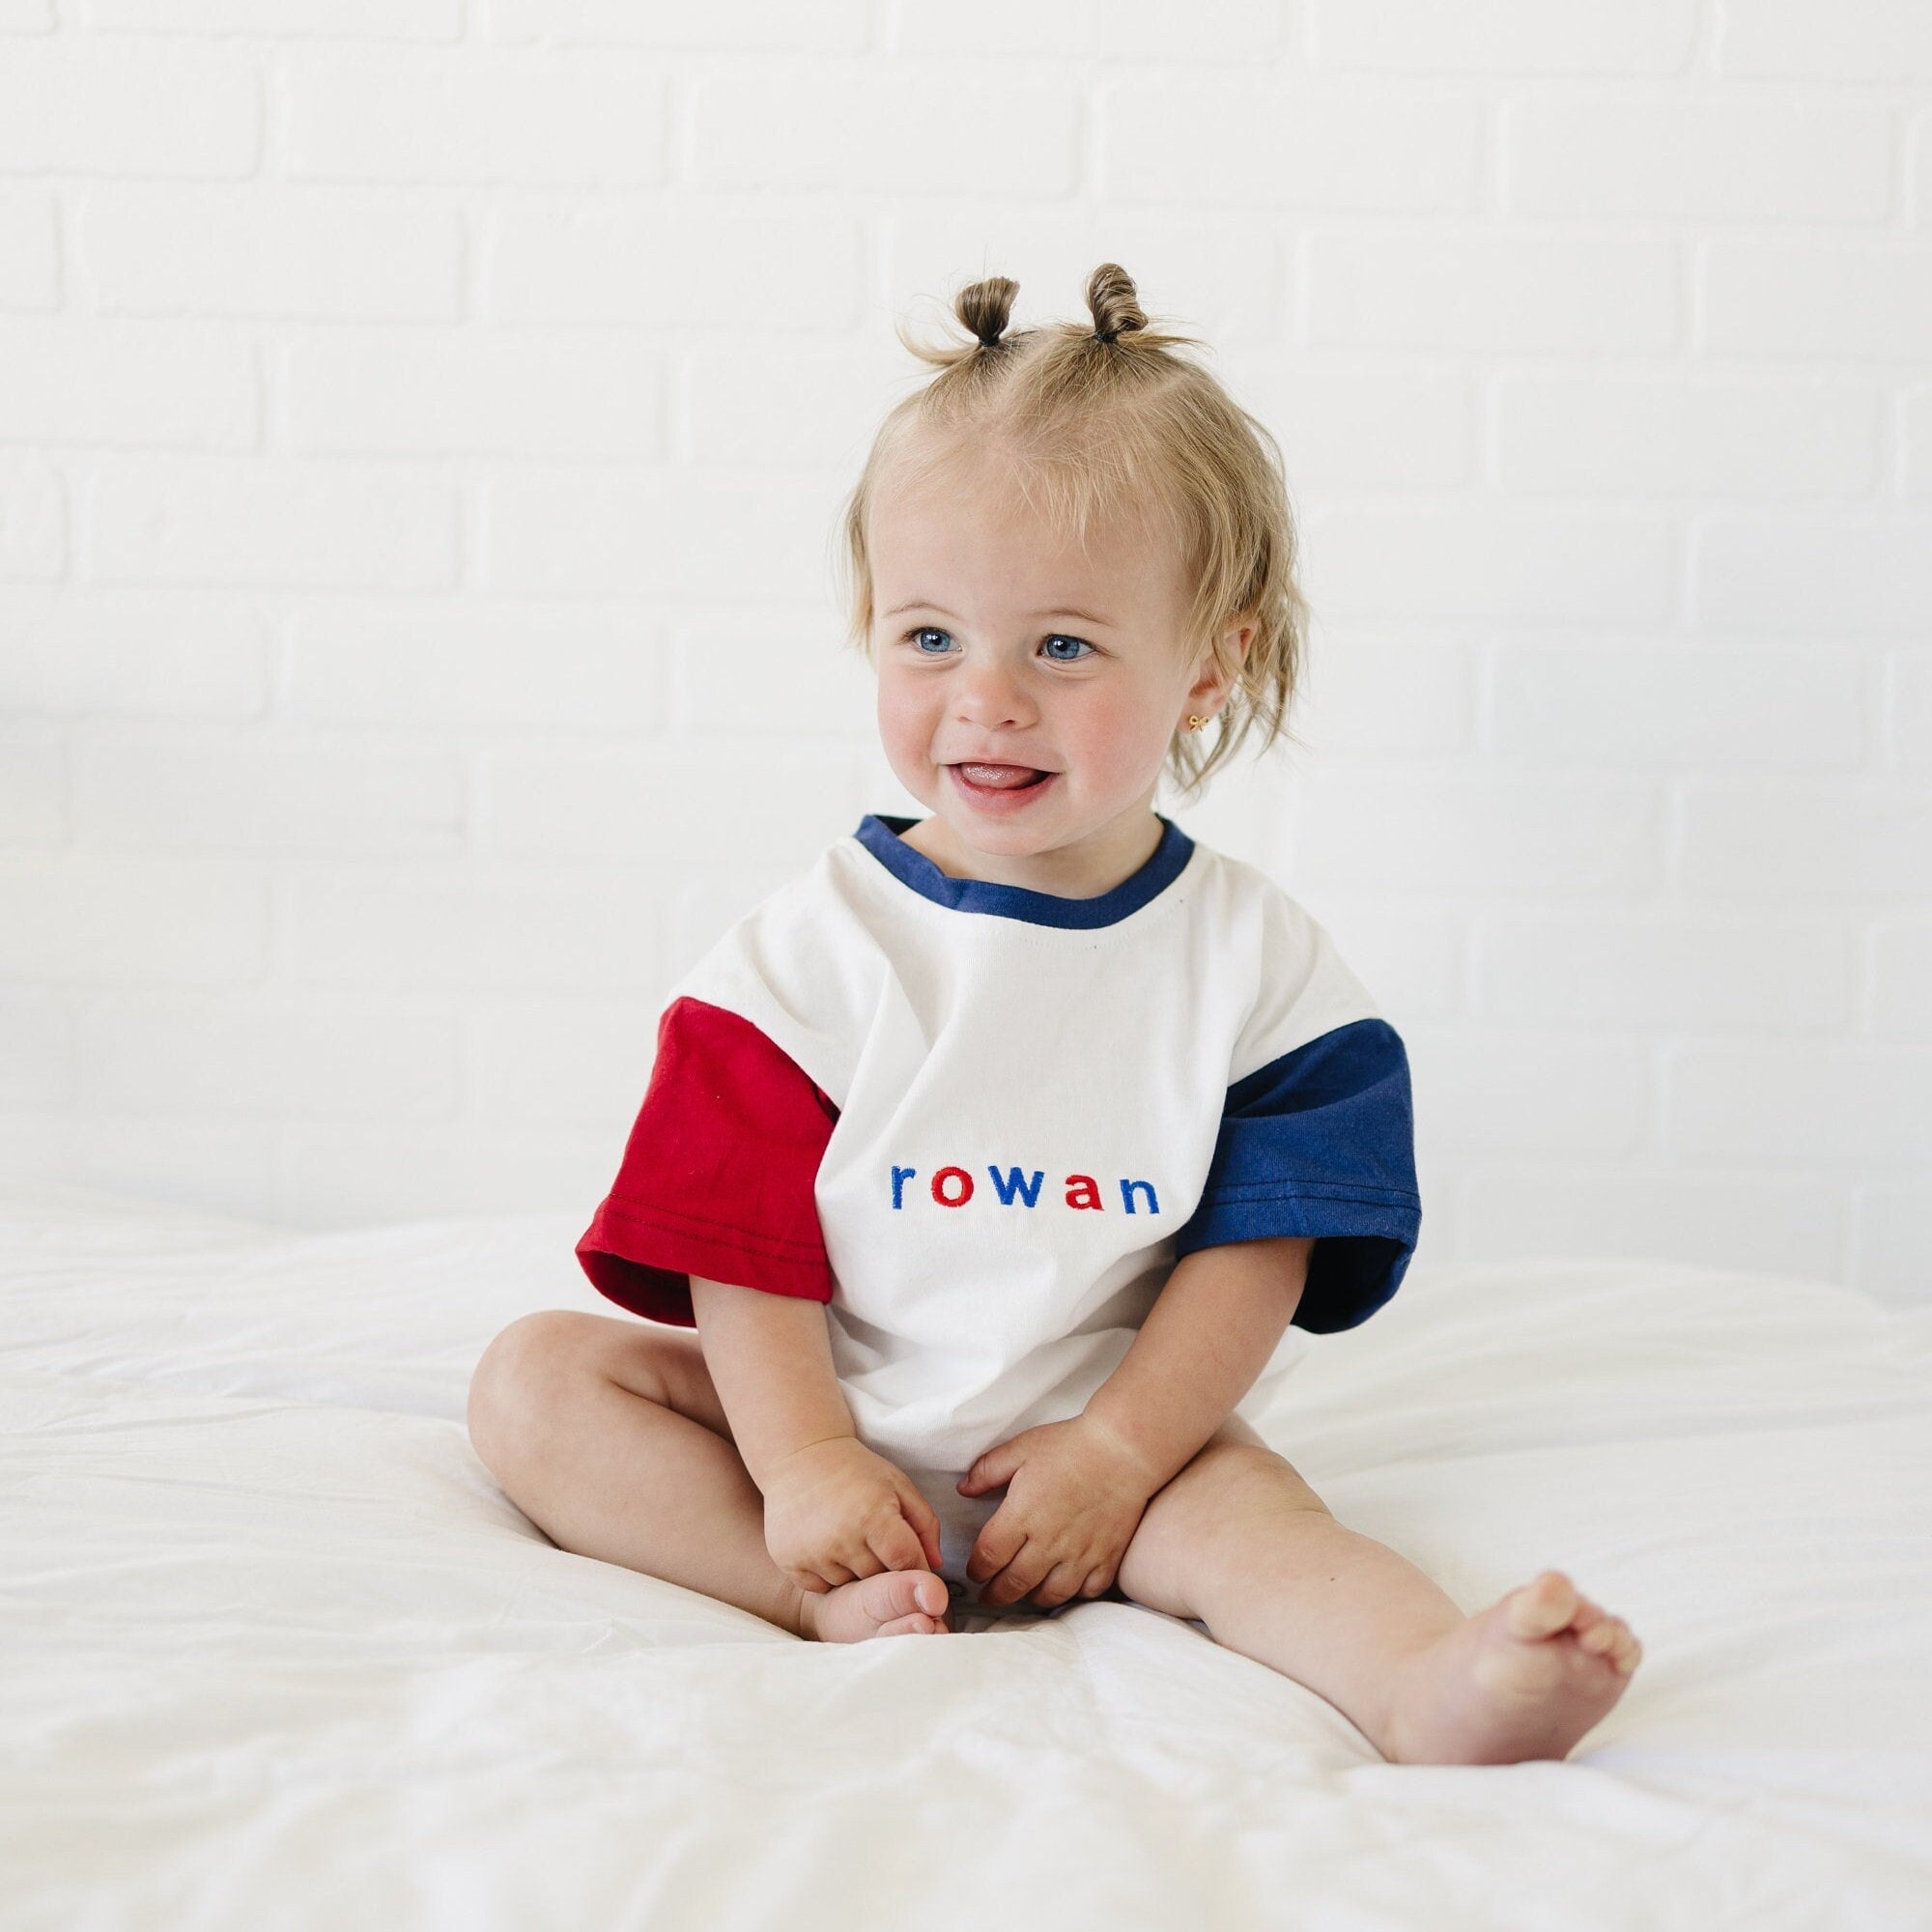 Custom 4th of July Embroidered Colorblock T-Shirt Romper